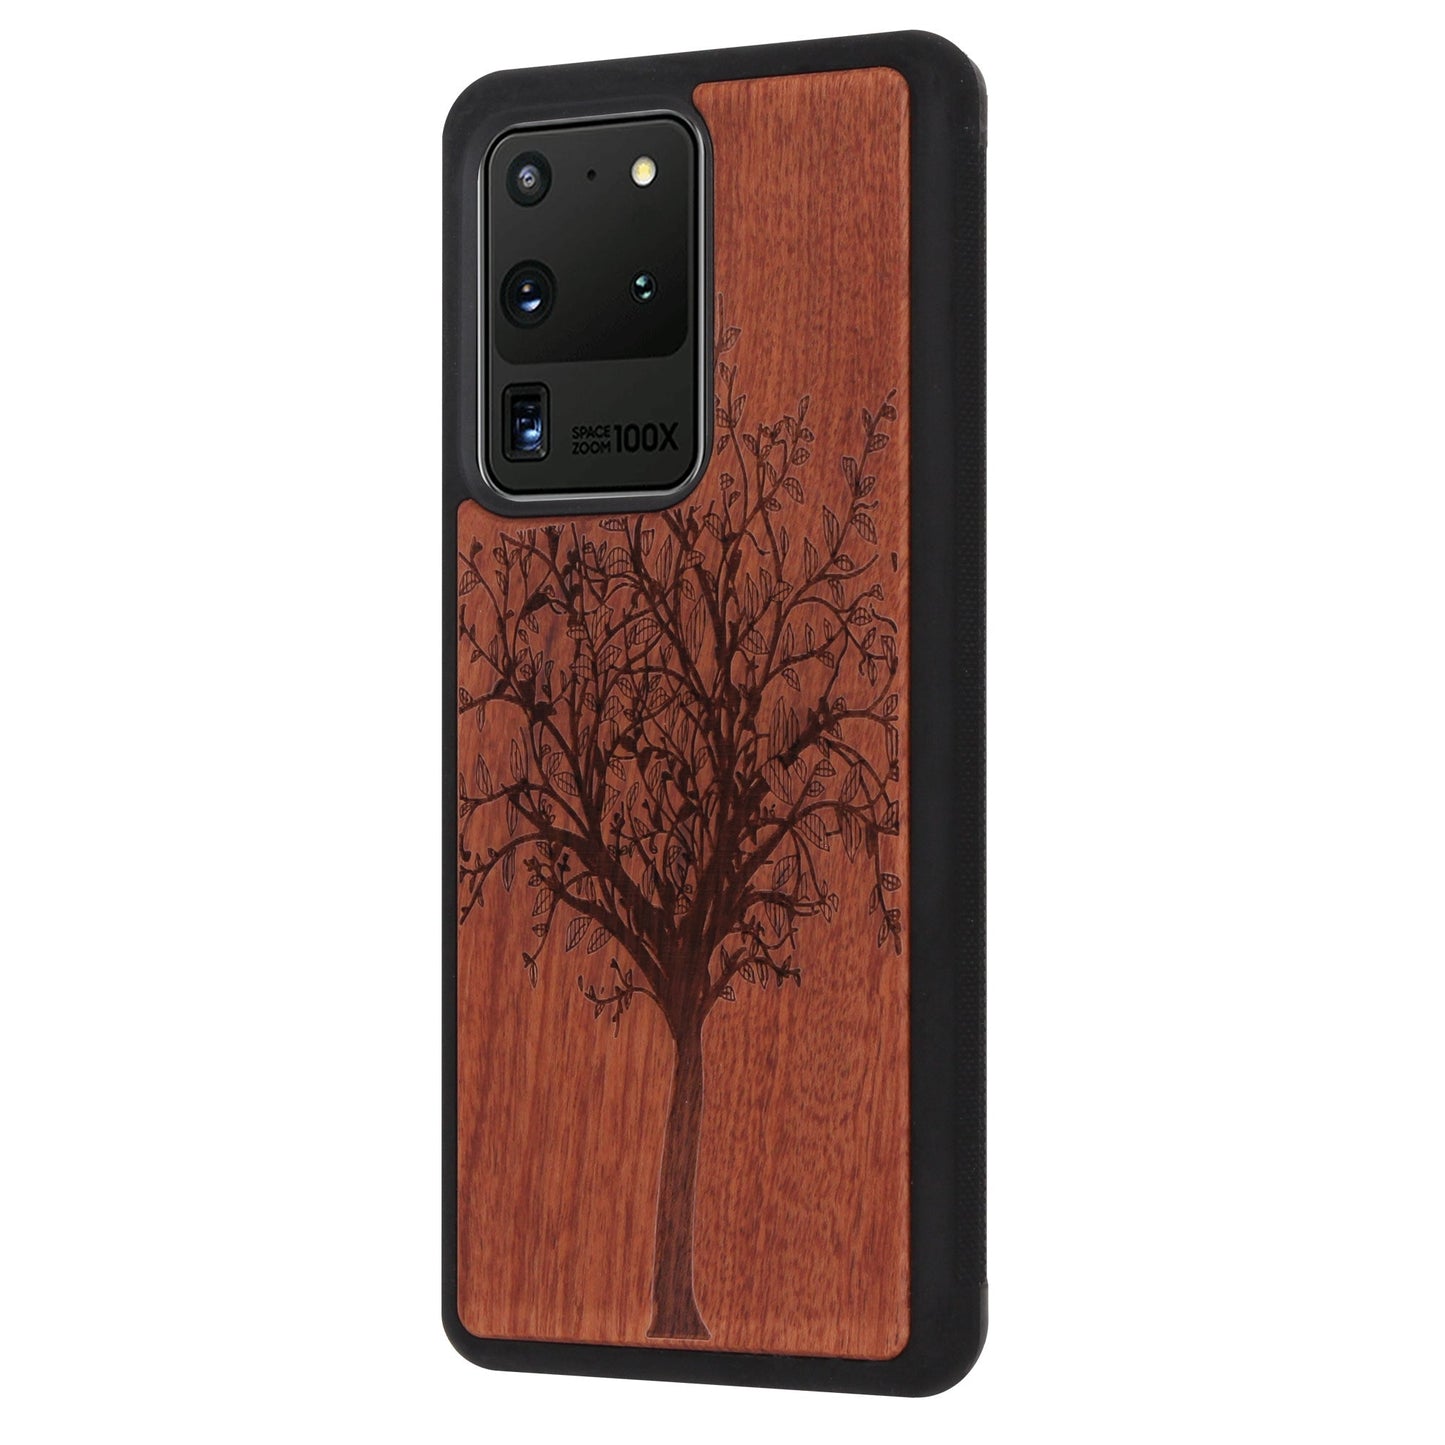 Tree of Life Eden case made of rosewood for Samsung Galaxy S20 Ultra